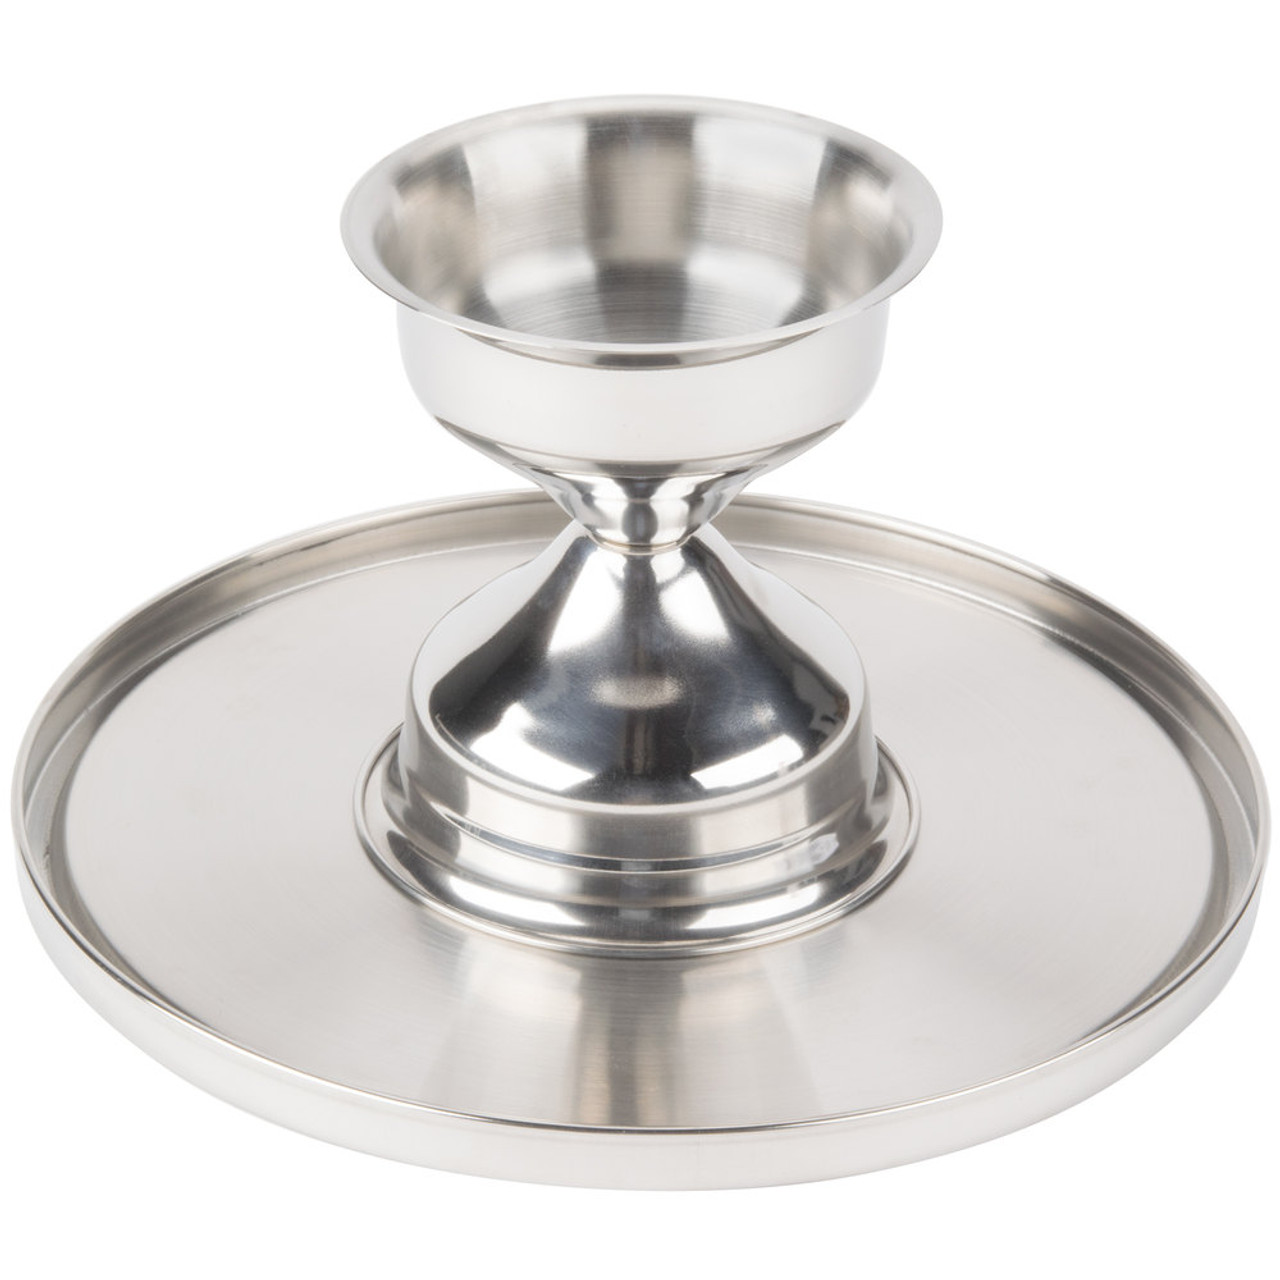 Stainless Steel Cake Stand 13"